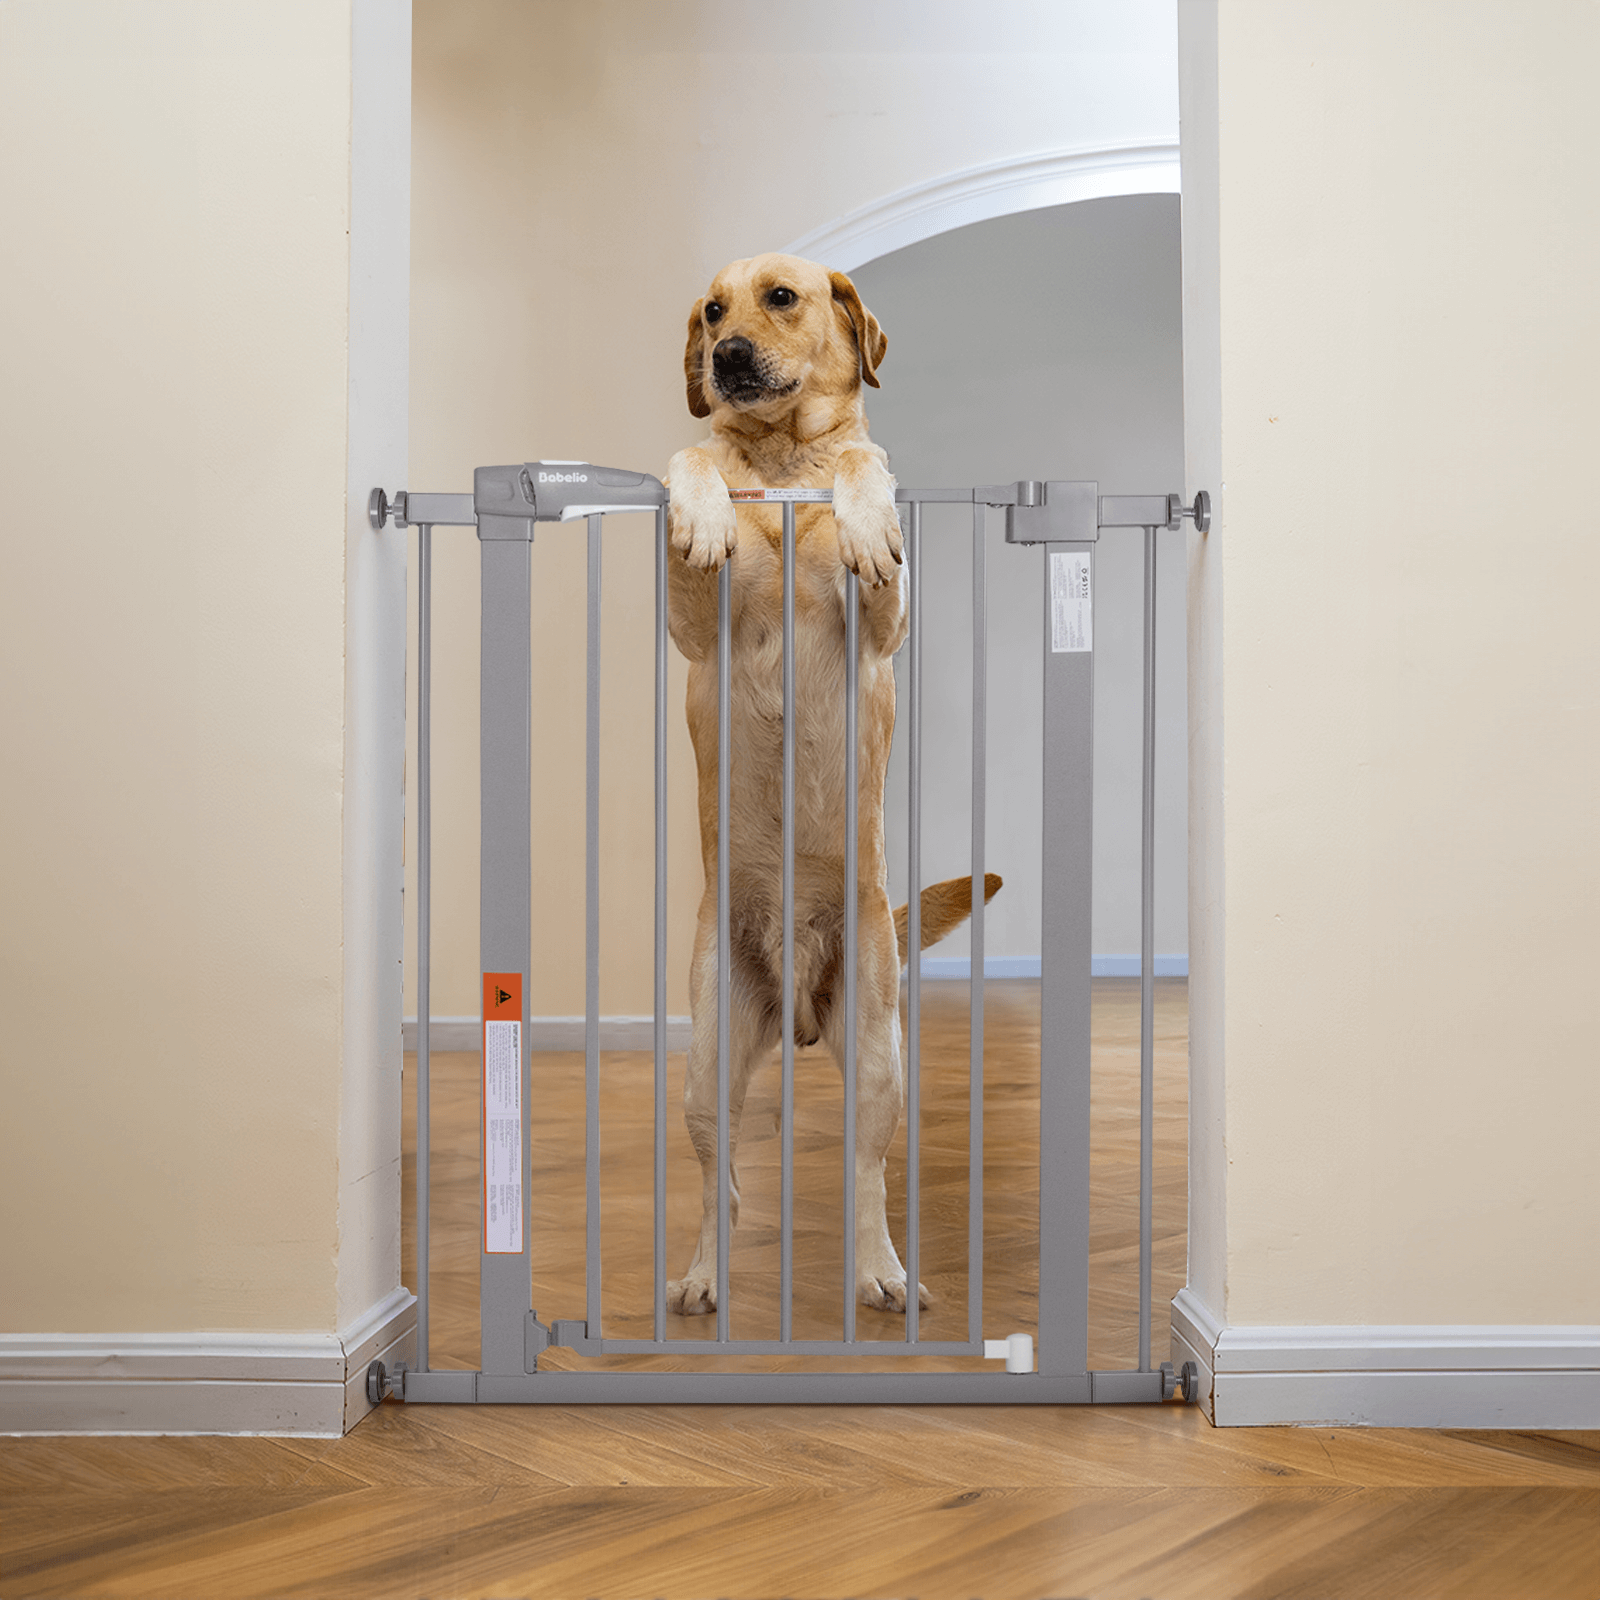 Babelio 36" High Adjustable Metal Gate for Babies & Pets – Easy Install, 26-40" Wide, Auto-Close, Gray